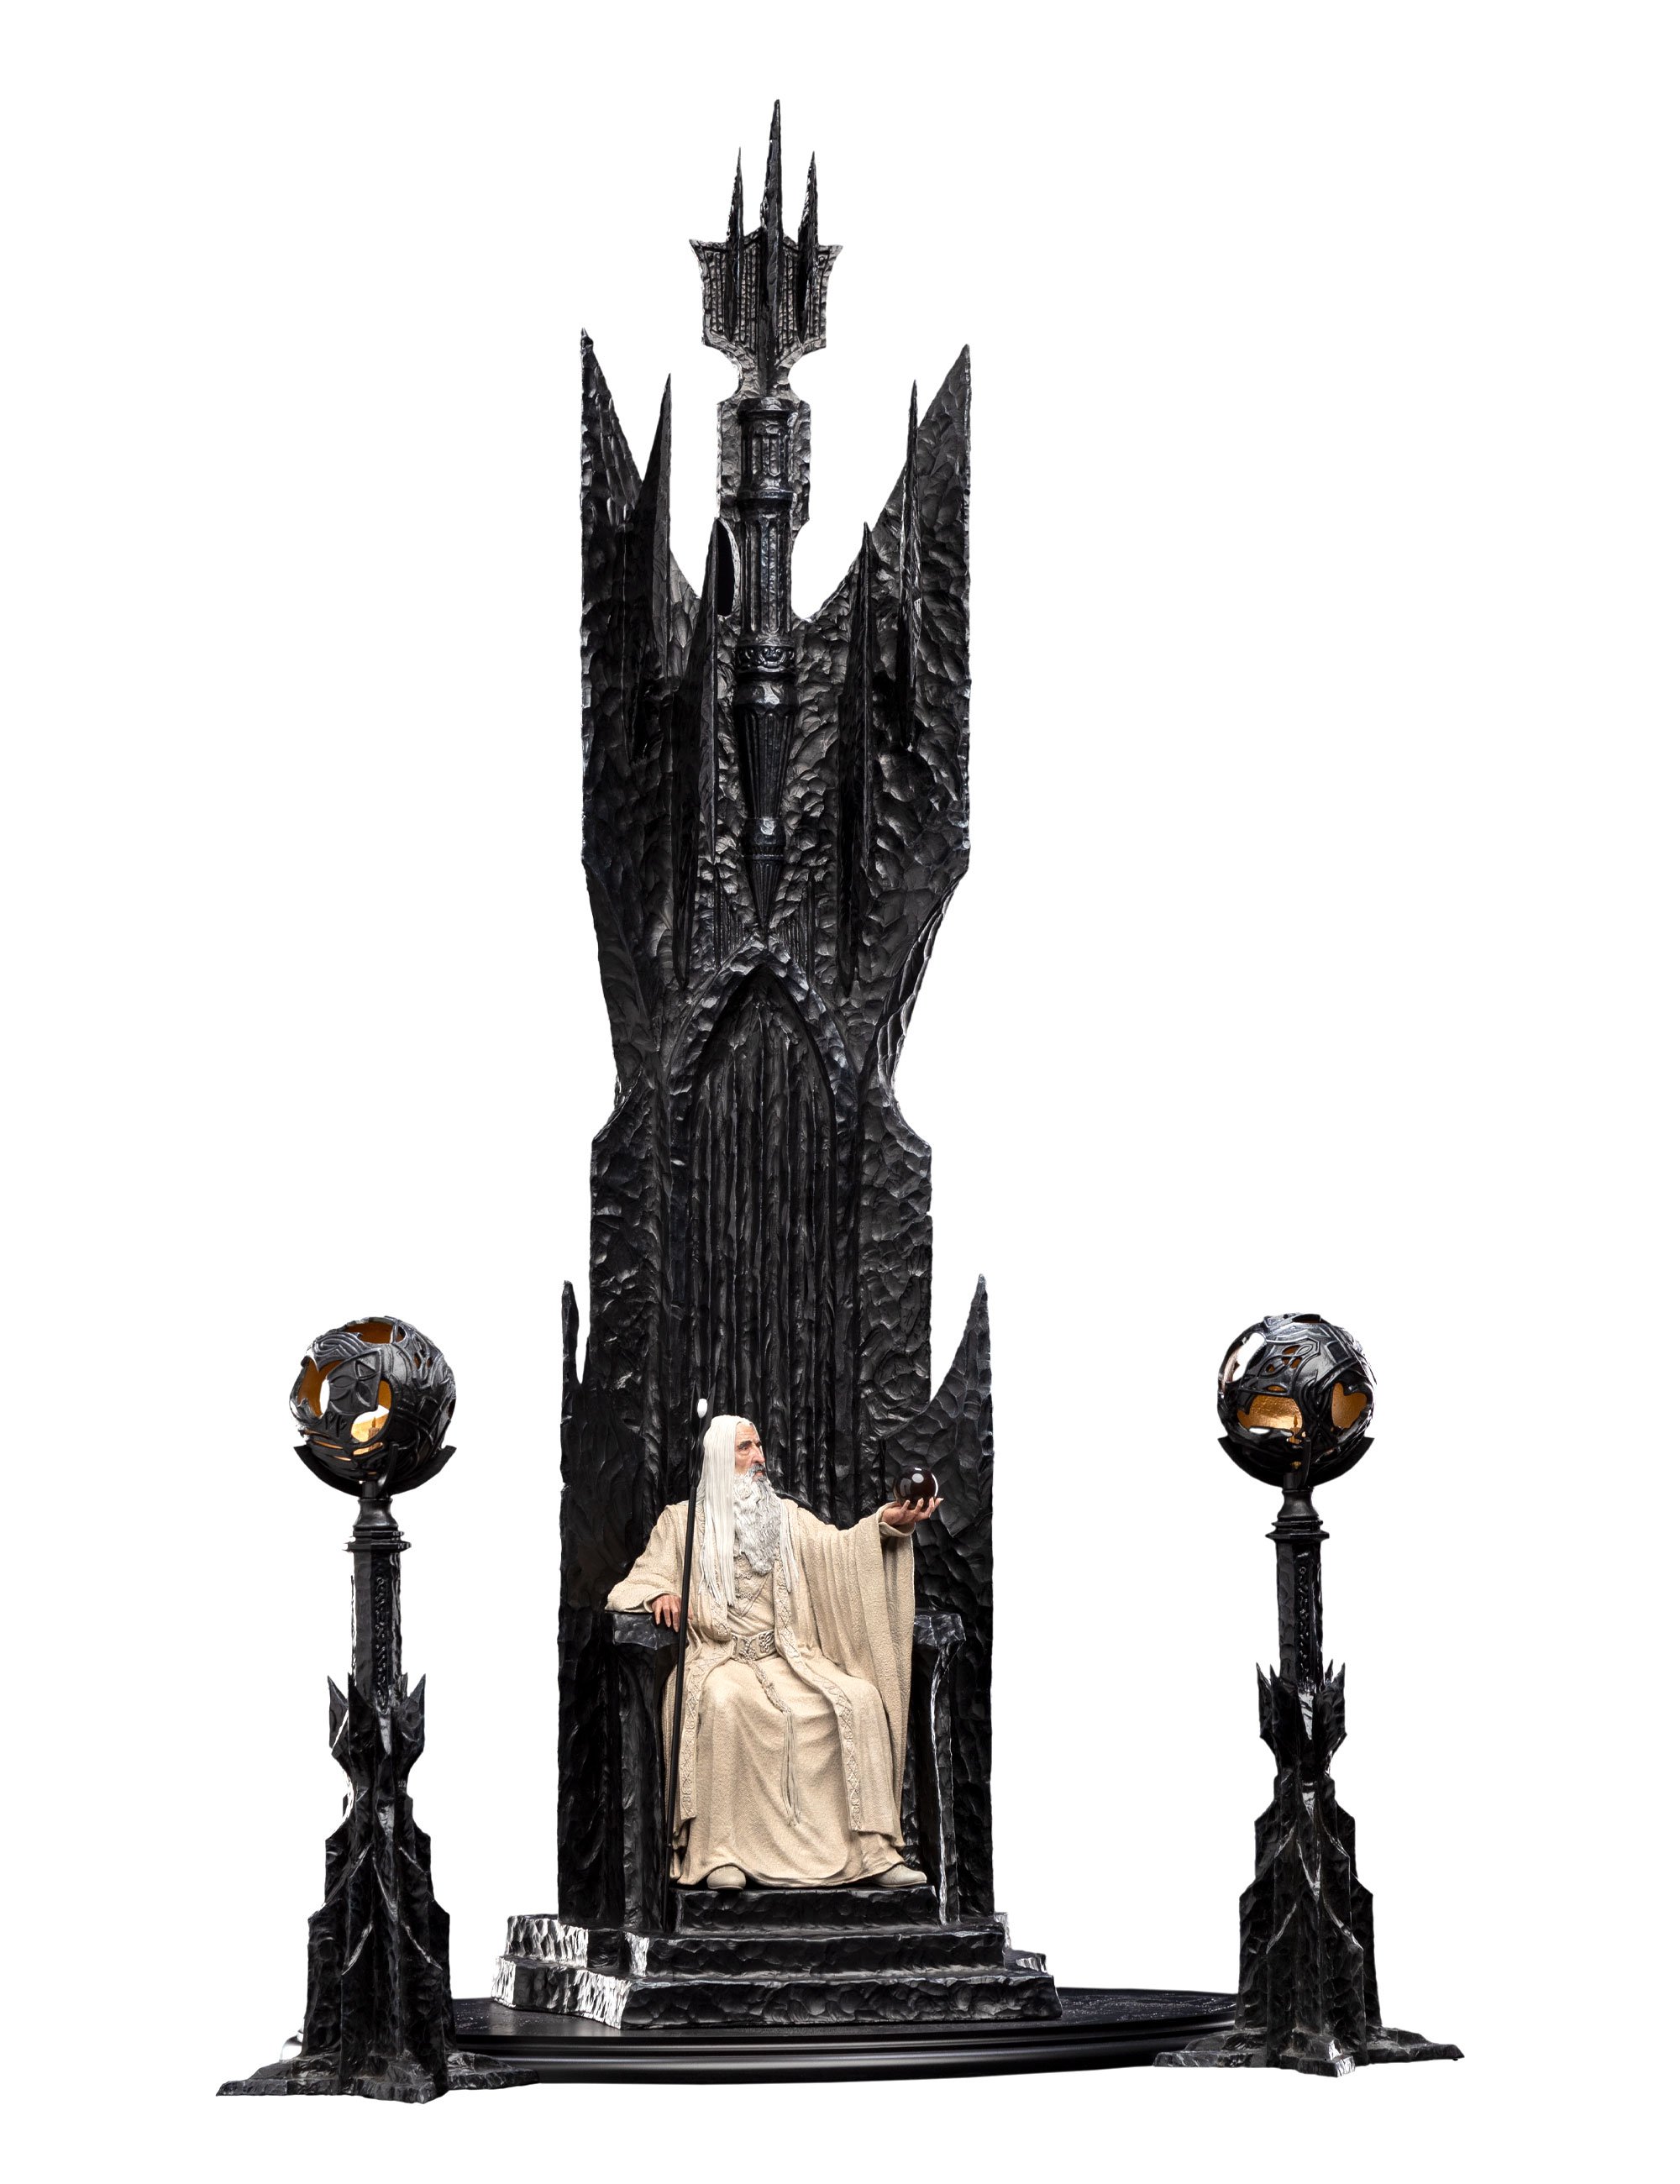 The Lord of the Rings - Saruman the White on Throne Statue - Fan-shop